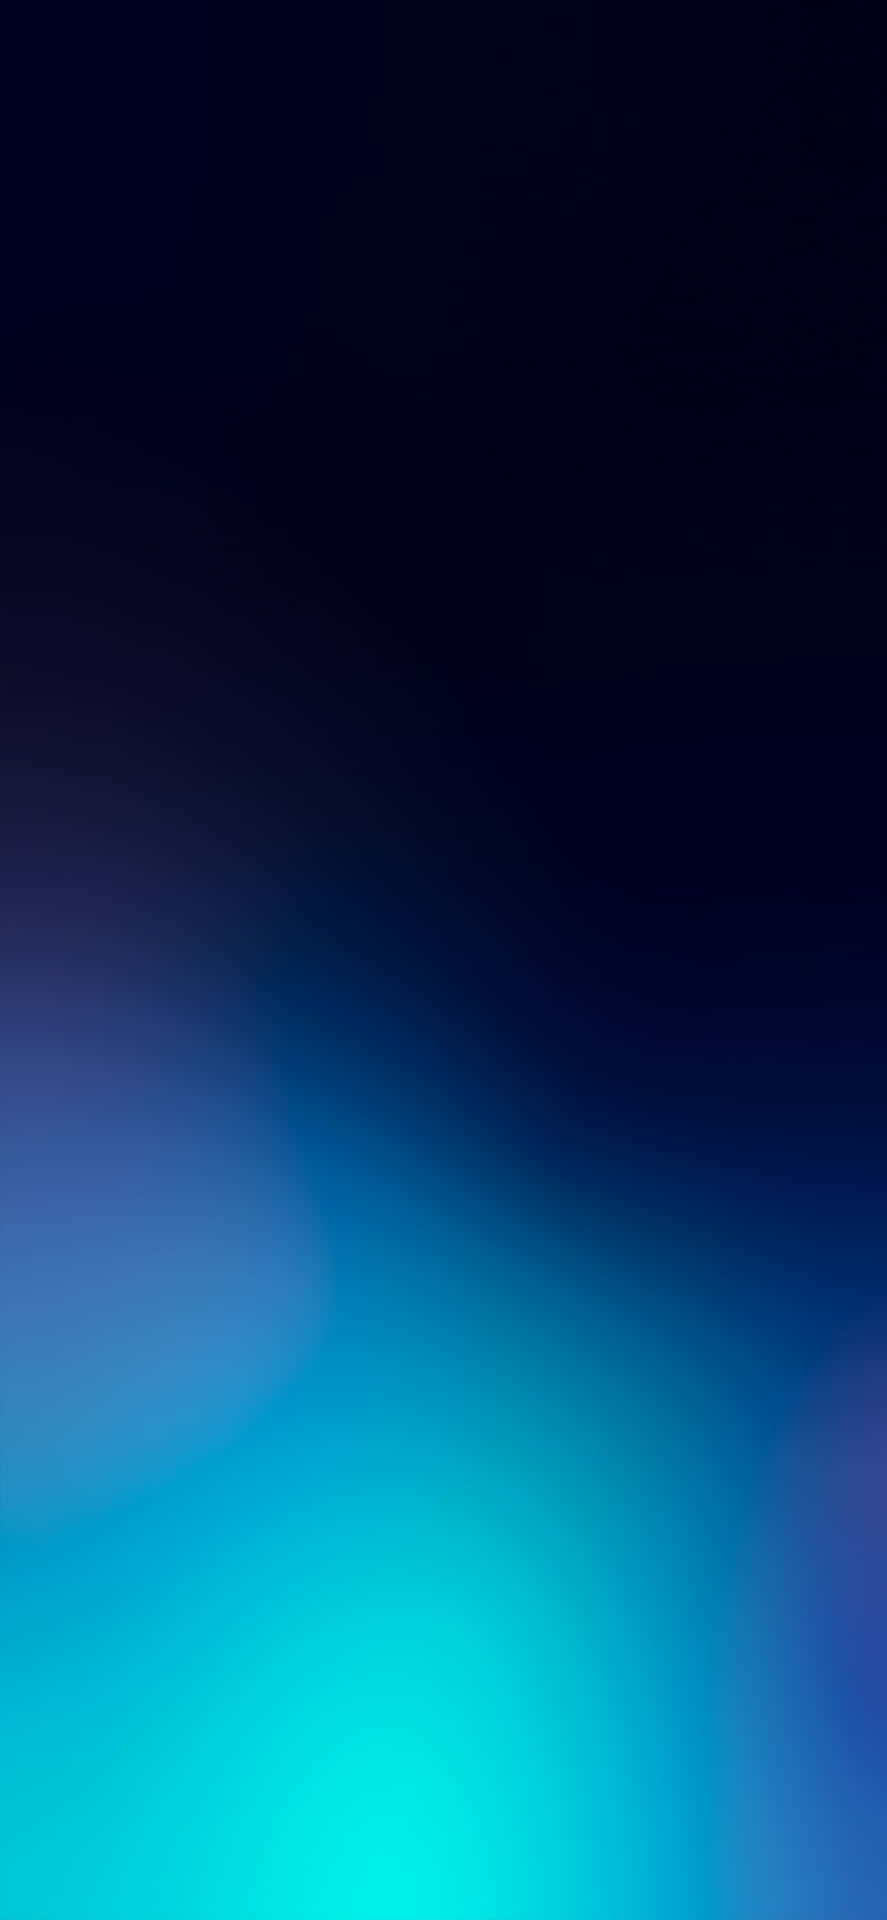 Get the wow-factor with the Black and Blue Iphone Wallpaper